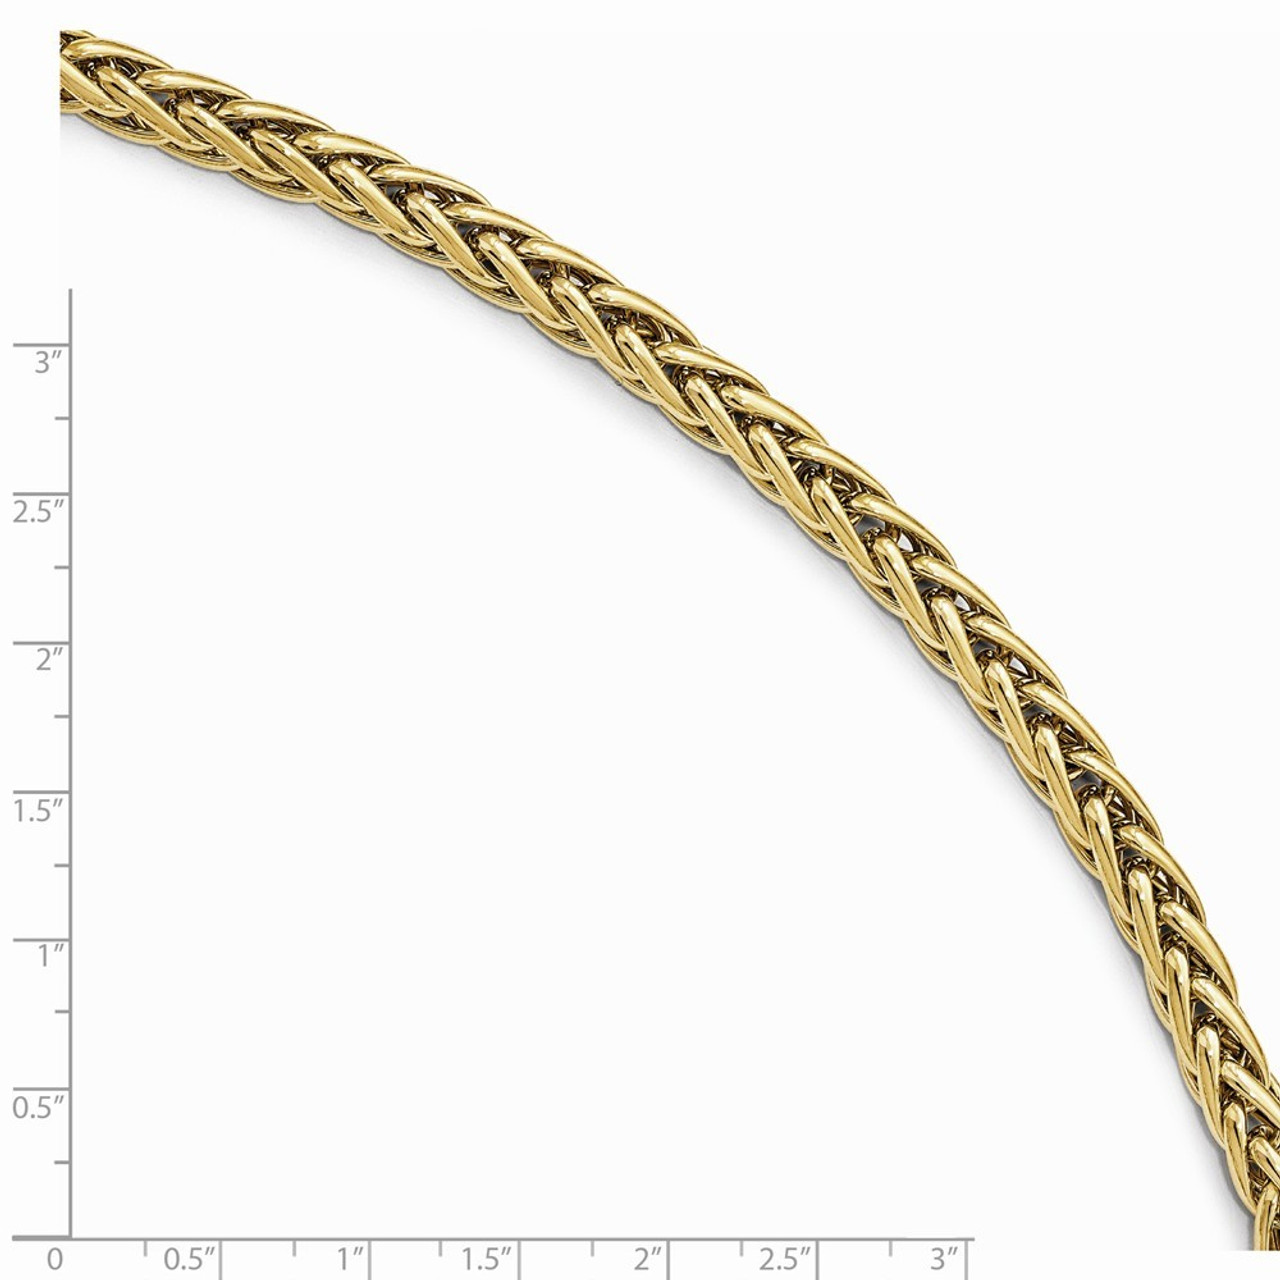 9ct Yellow & White Gold 8 Inch Rope Chain Bracelet